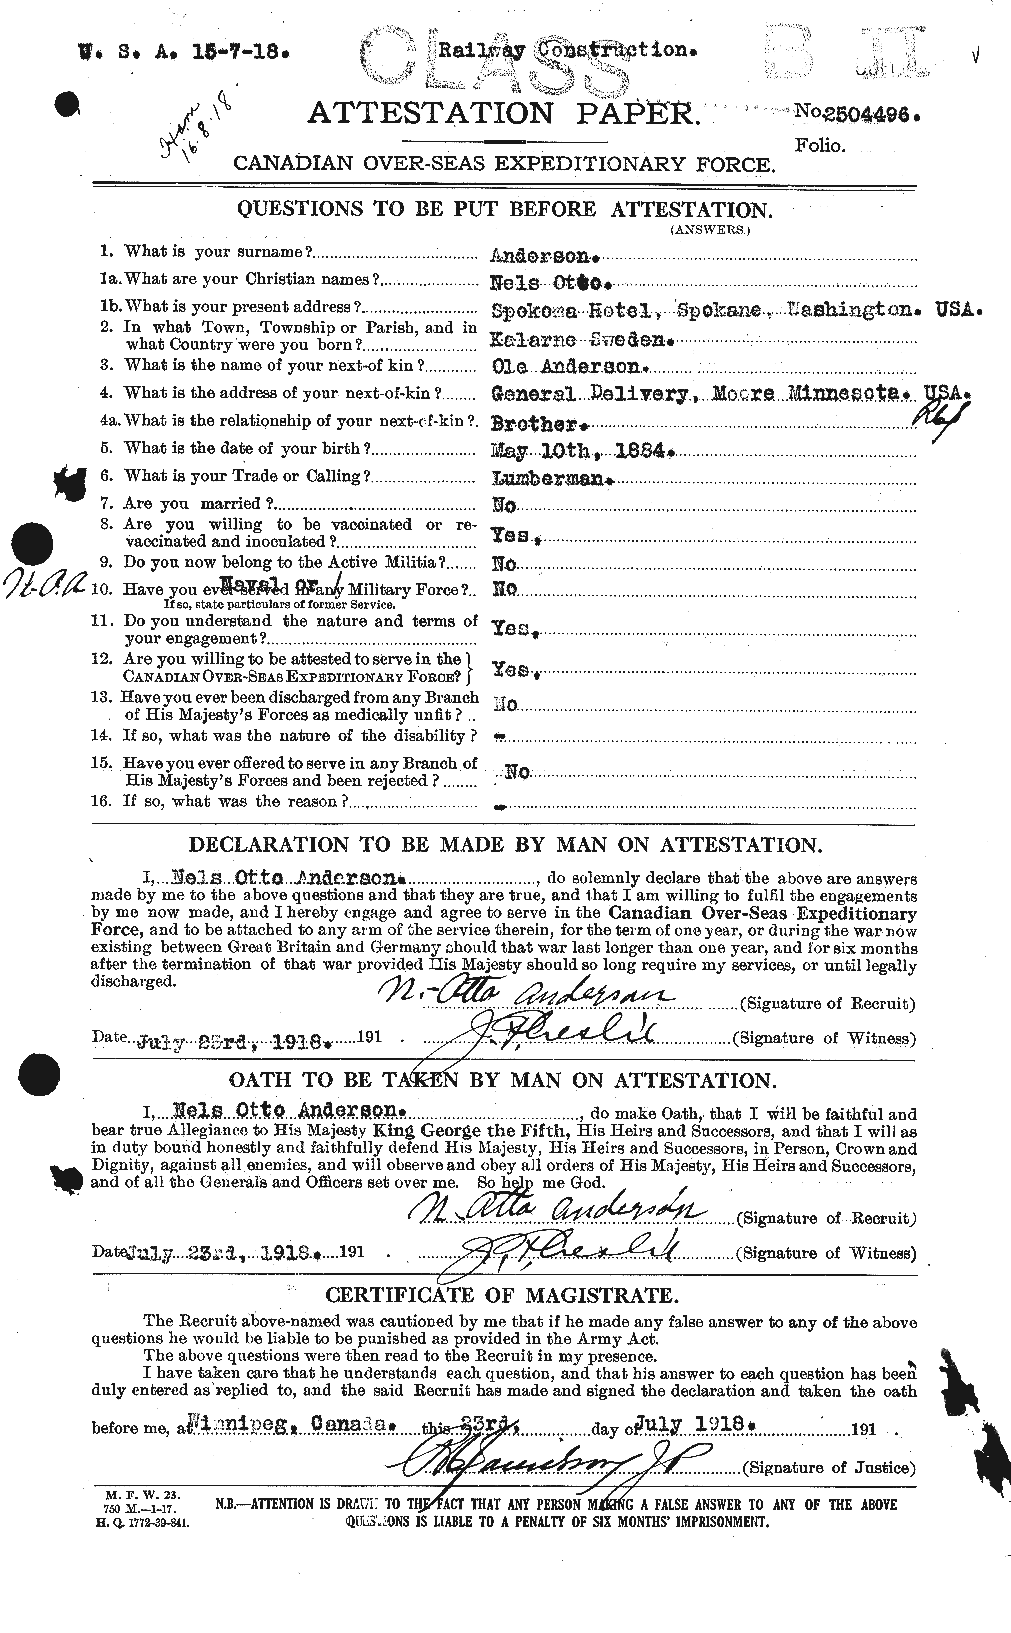 Personnel Records of the First World War - CEF 207430a